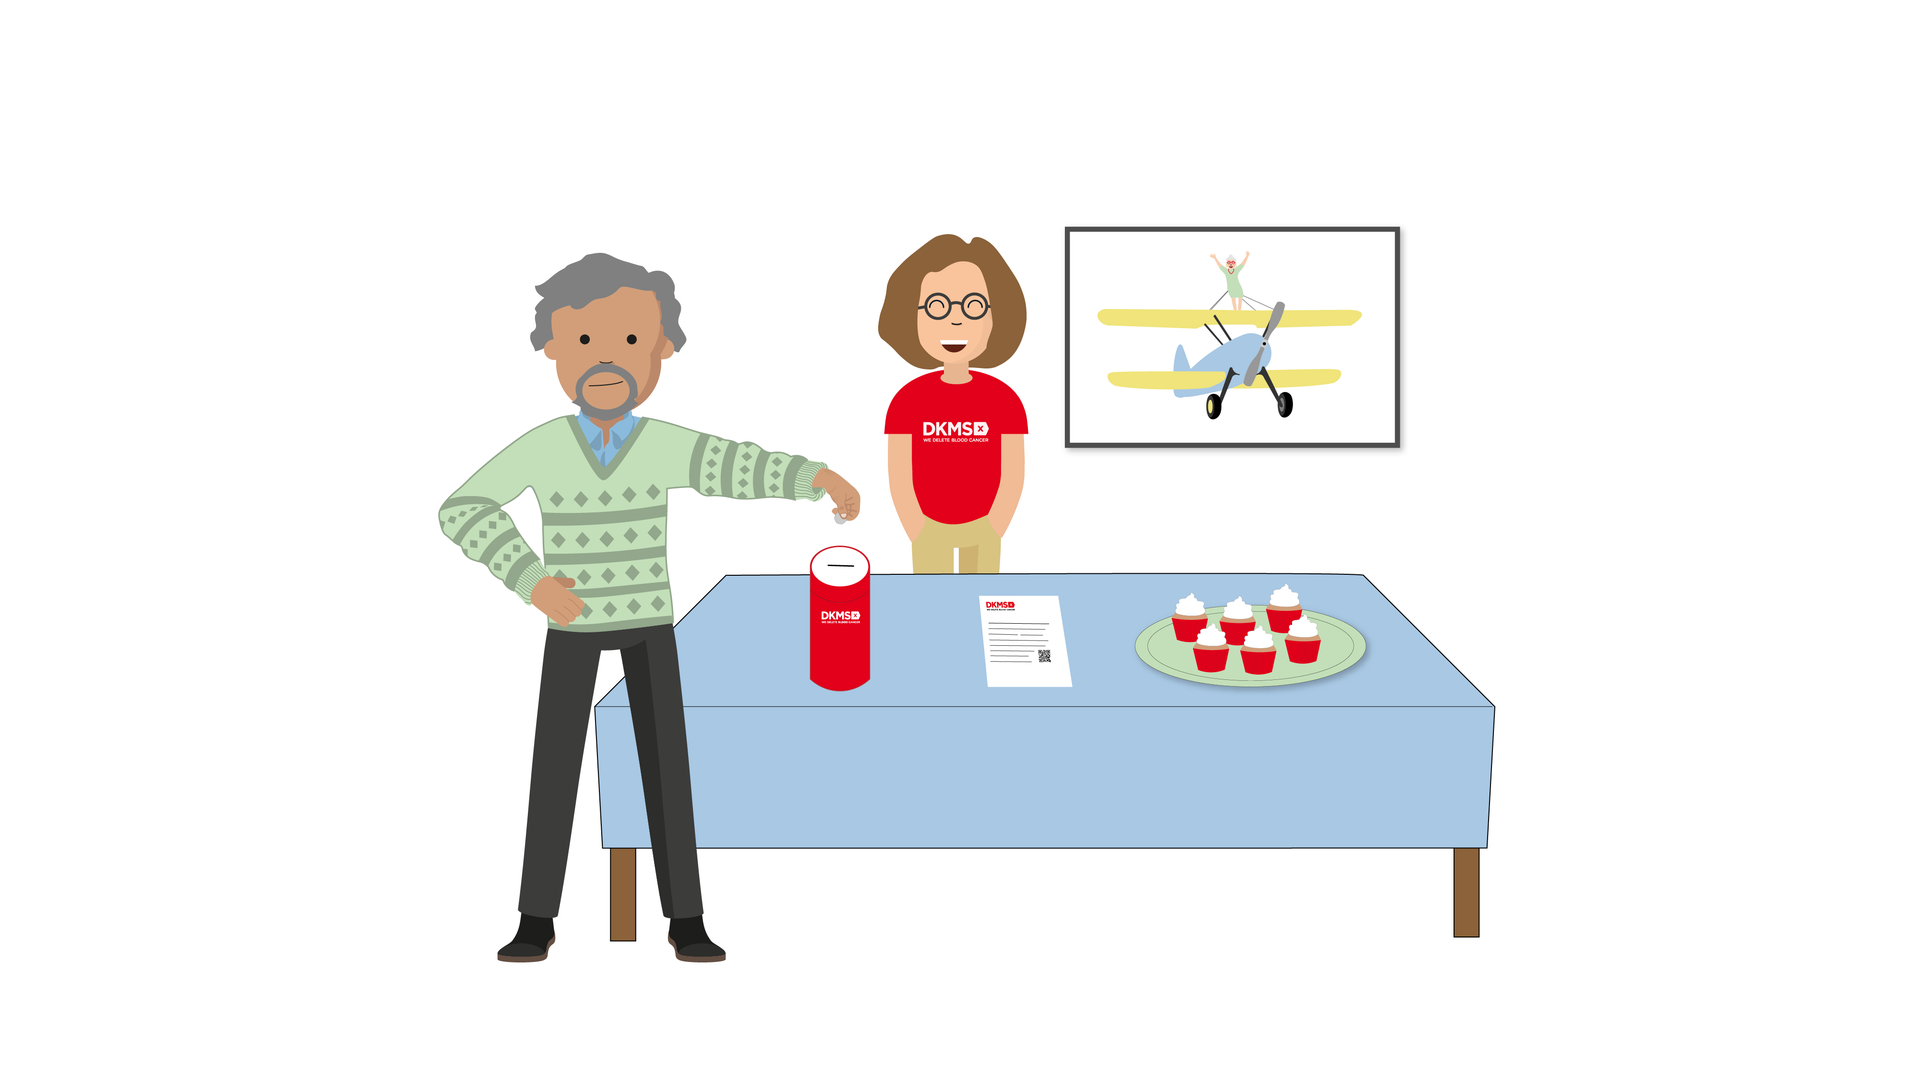 Graphic showing middle aged man and woman with charit donation money box and plate of baked